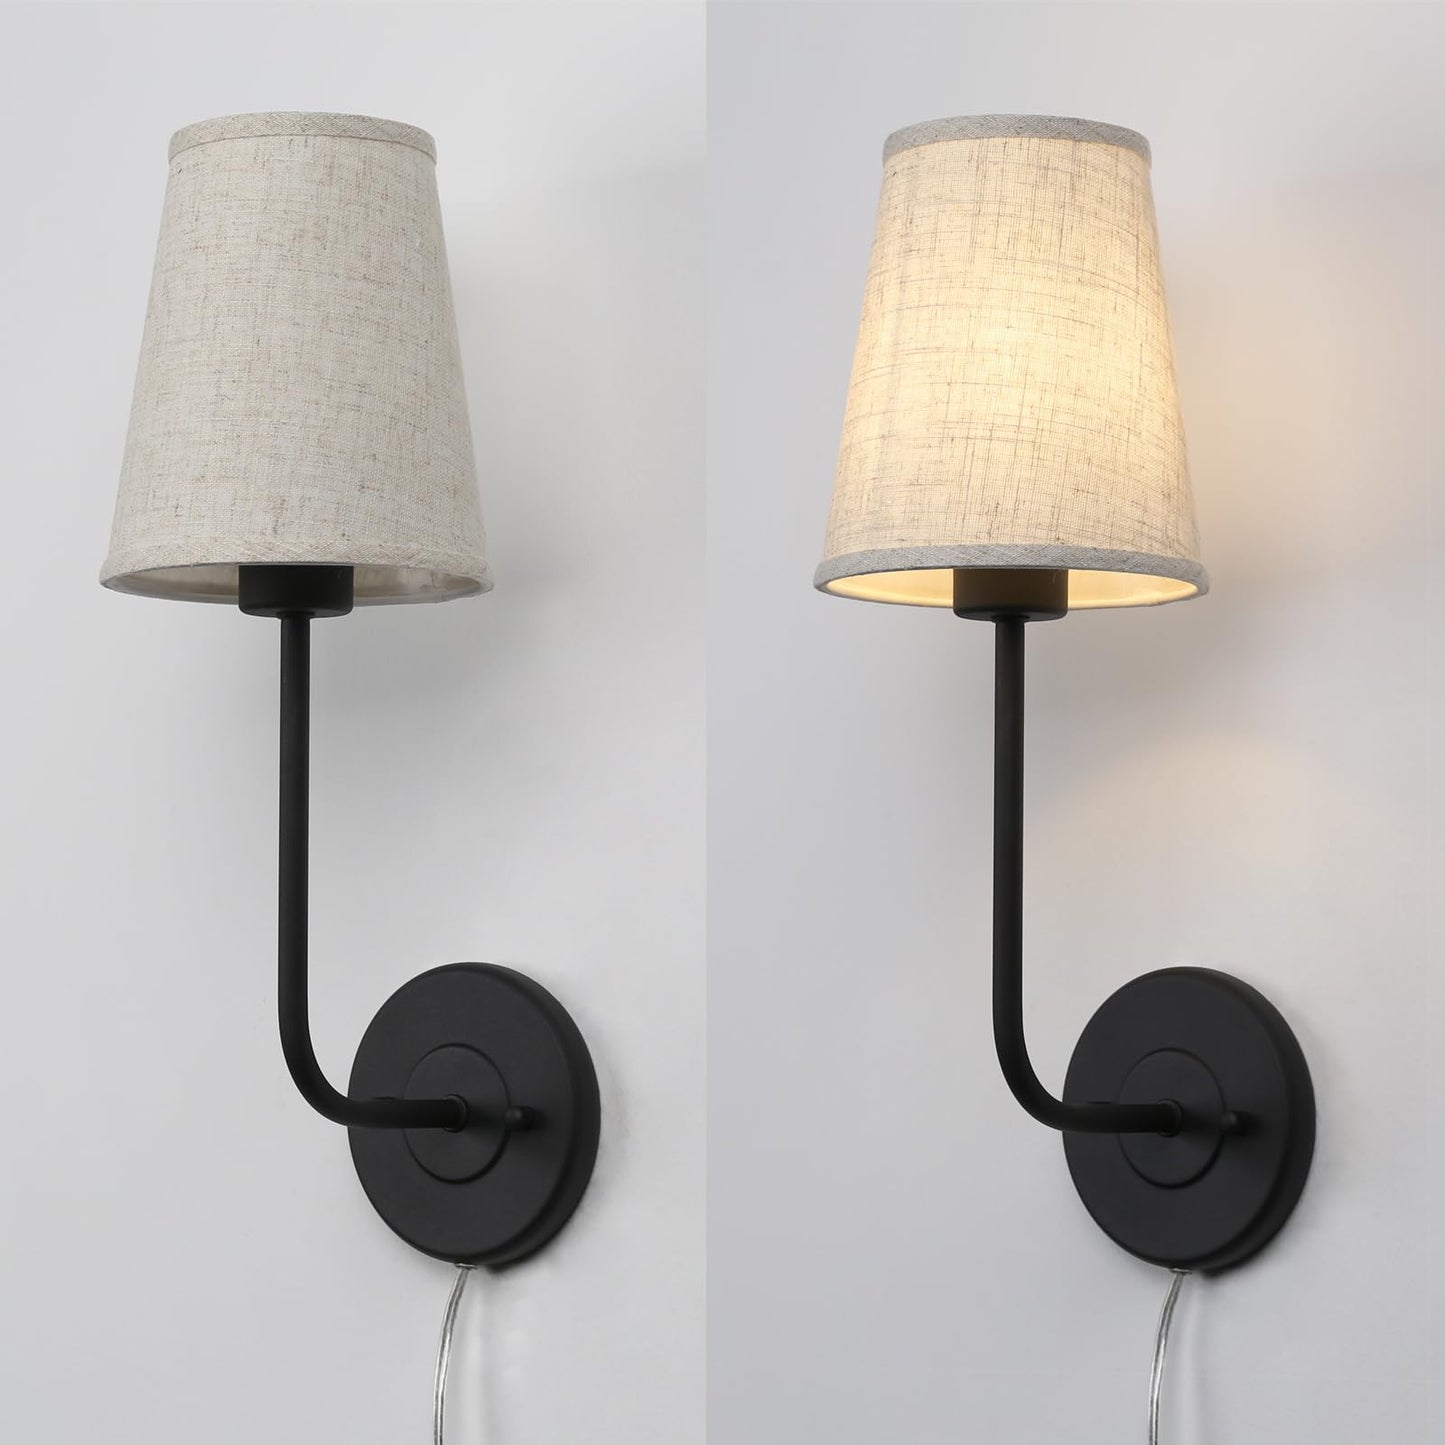 Set of 2 Plug In Fabric Wall Sconce Linen Cloth Shade Vintage Wall Light